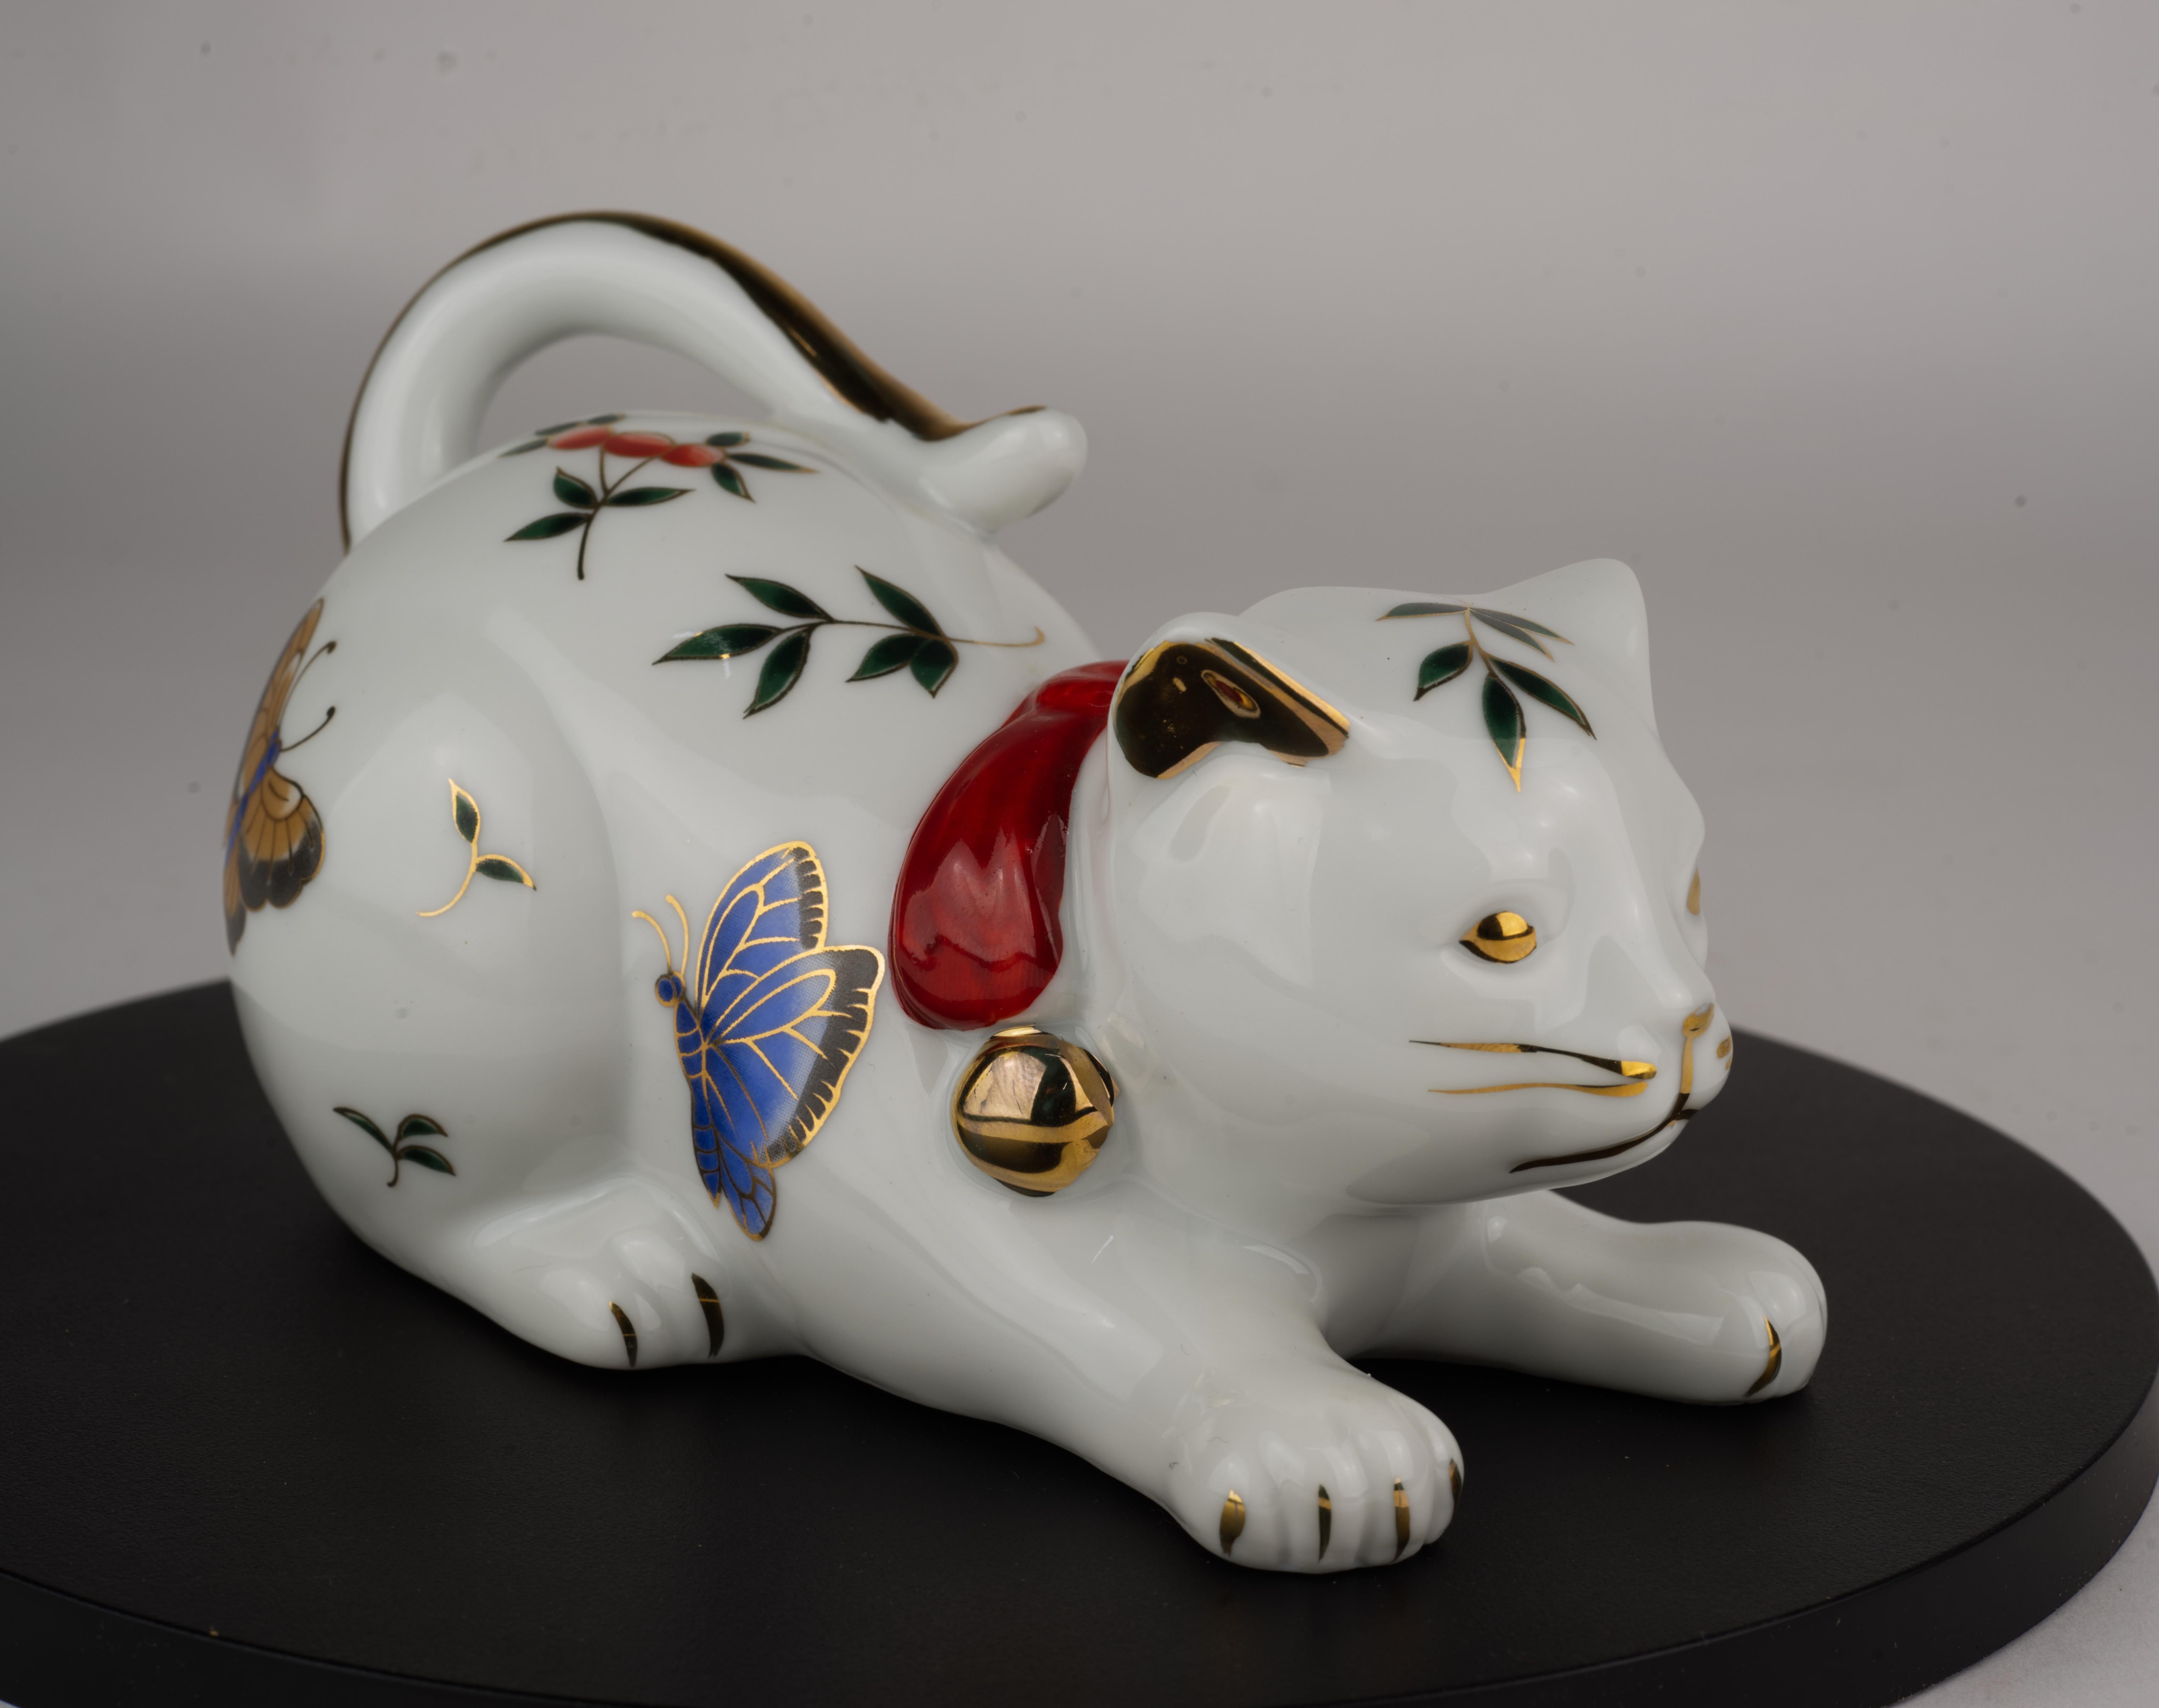 Rare porcelain figurine of a playing cat is hand decorated with butterflies and leaves designs and gold accents. It is unusual to find a playing cat figurine; most Takahashi cats are depicted sleeping with their heads on their paws, tails folded